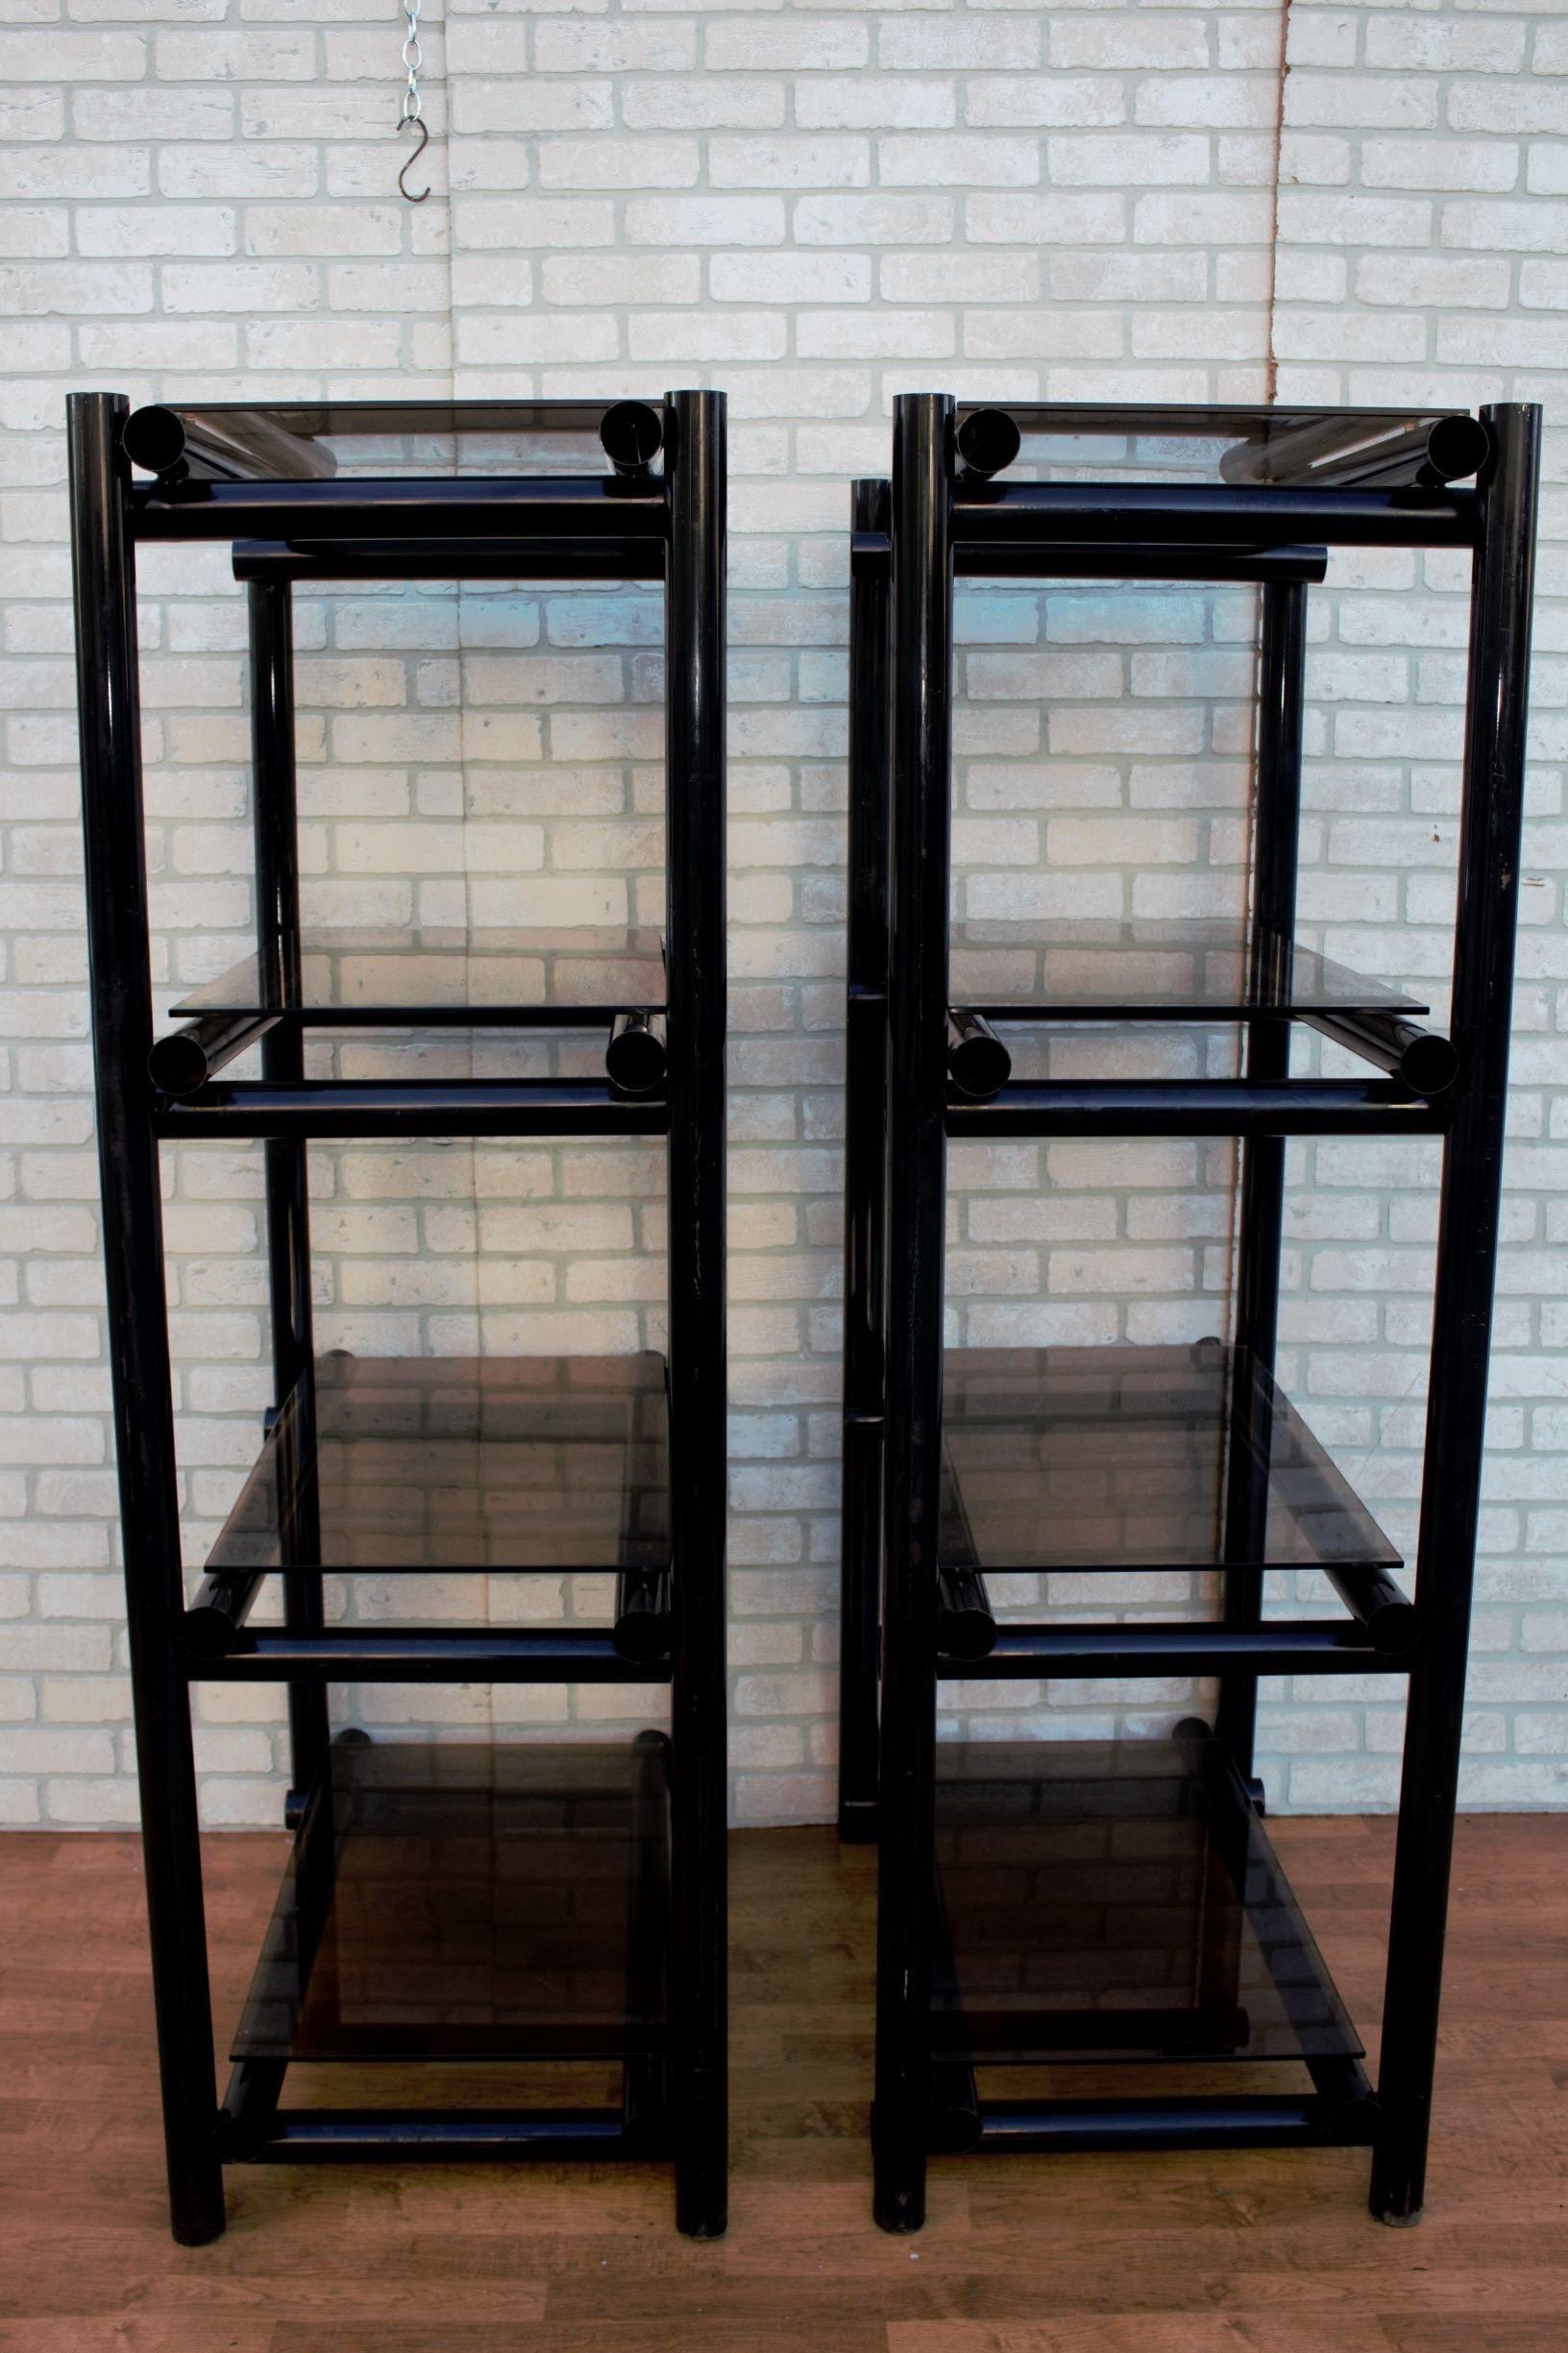 Vintage Modernist Tubular Black Metal Shelving Etagere with Tinted Glass, Pair In Good Condition For Sale In Chicago, IL